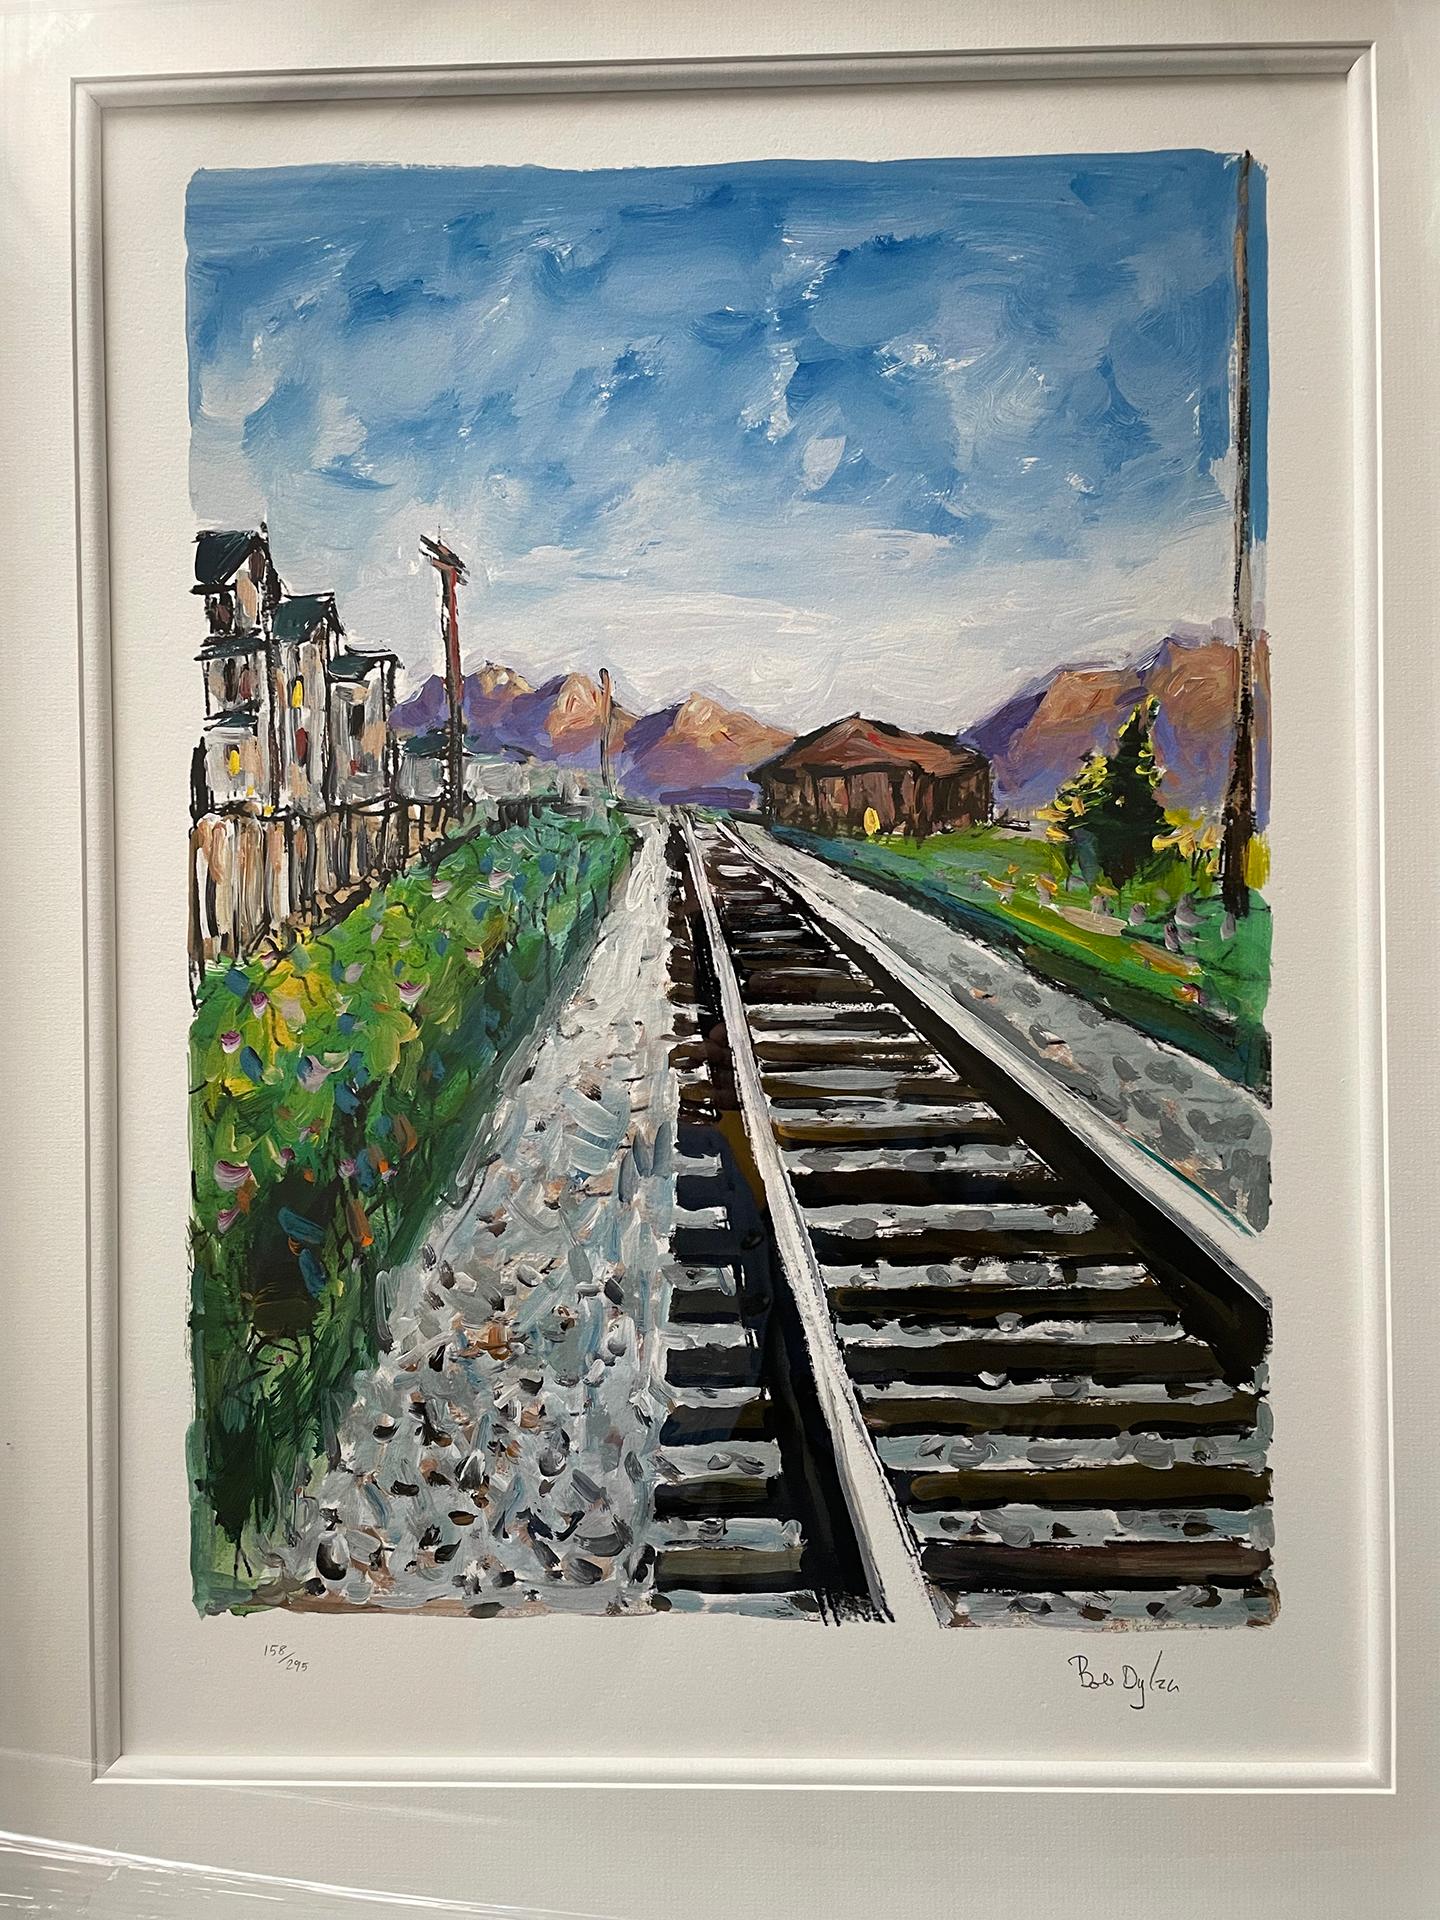 Acknowledged as perhaps the most integral and sought-after artwork from The Drawn Blank Series, 'Train Tracks' is regarded as one of Bob Dylan’s most iconic and engaging images to date. Such is Dylan’s own esteem for the now iconic graphic, he